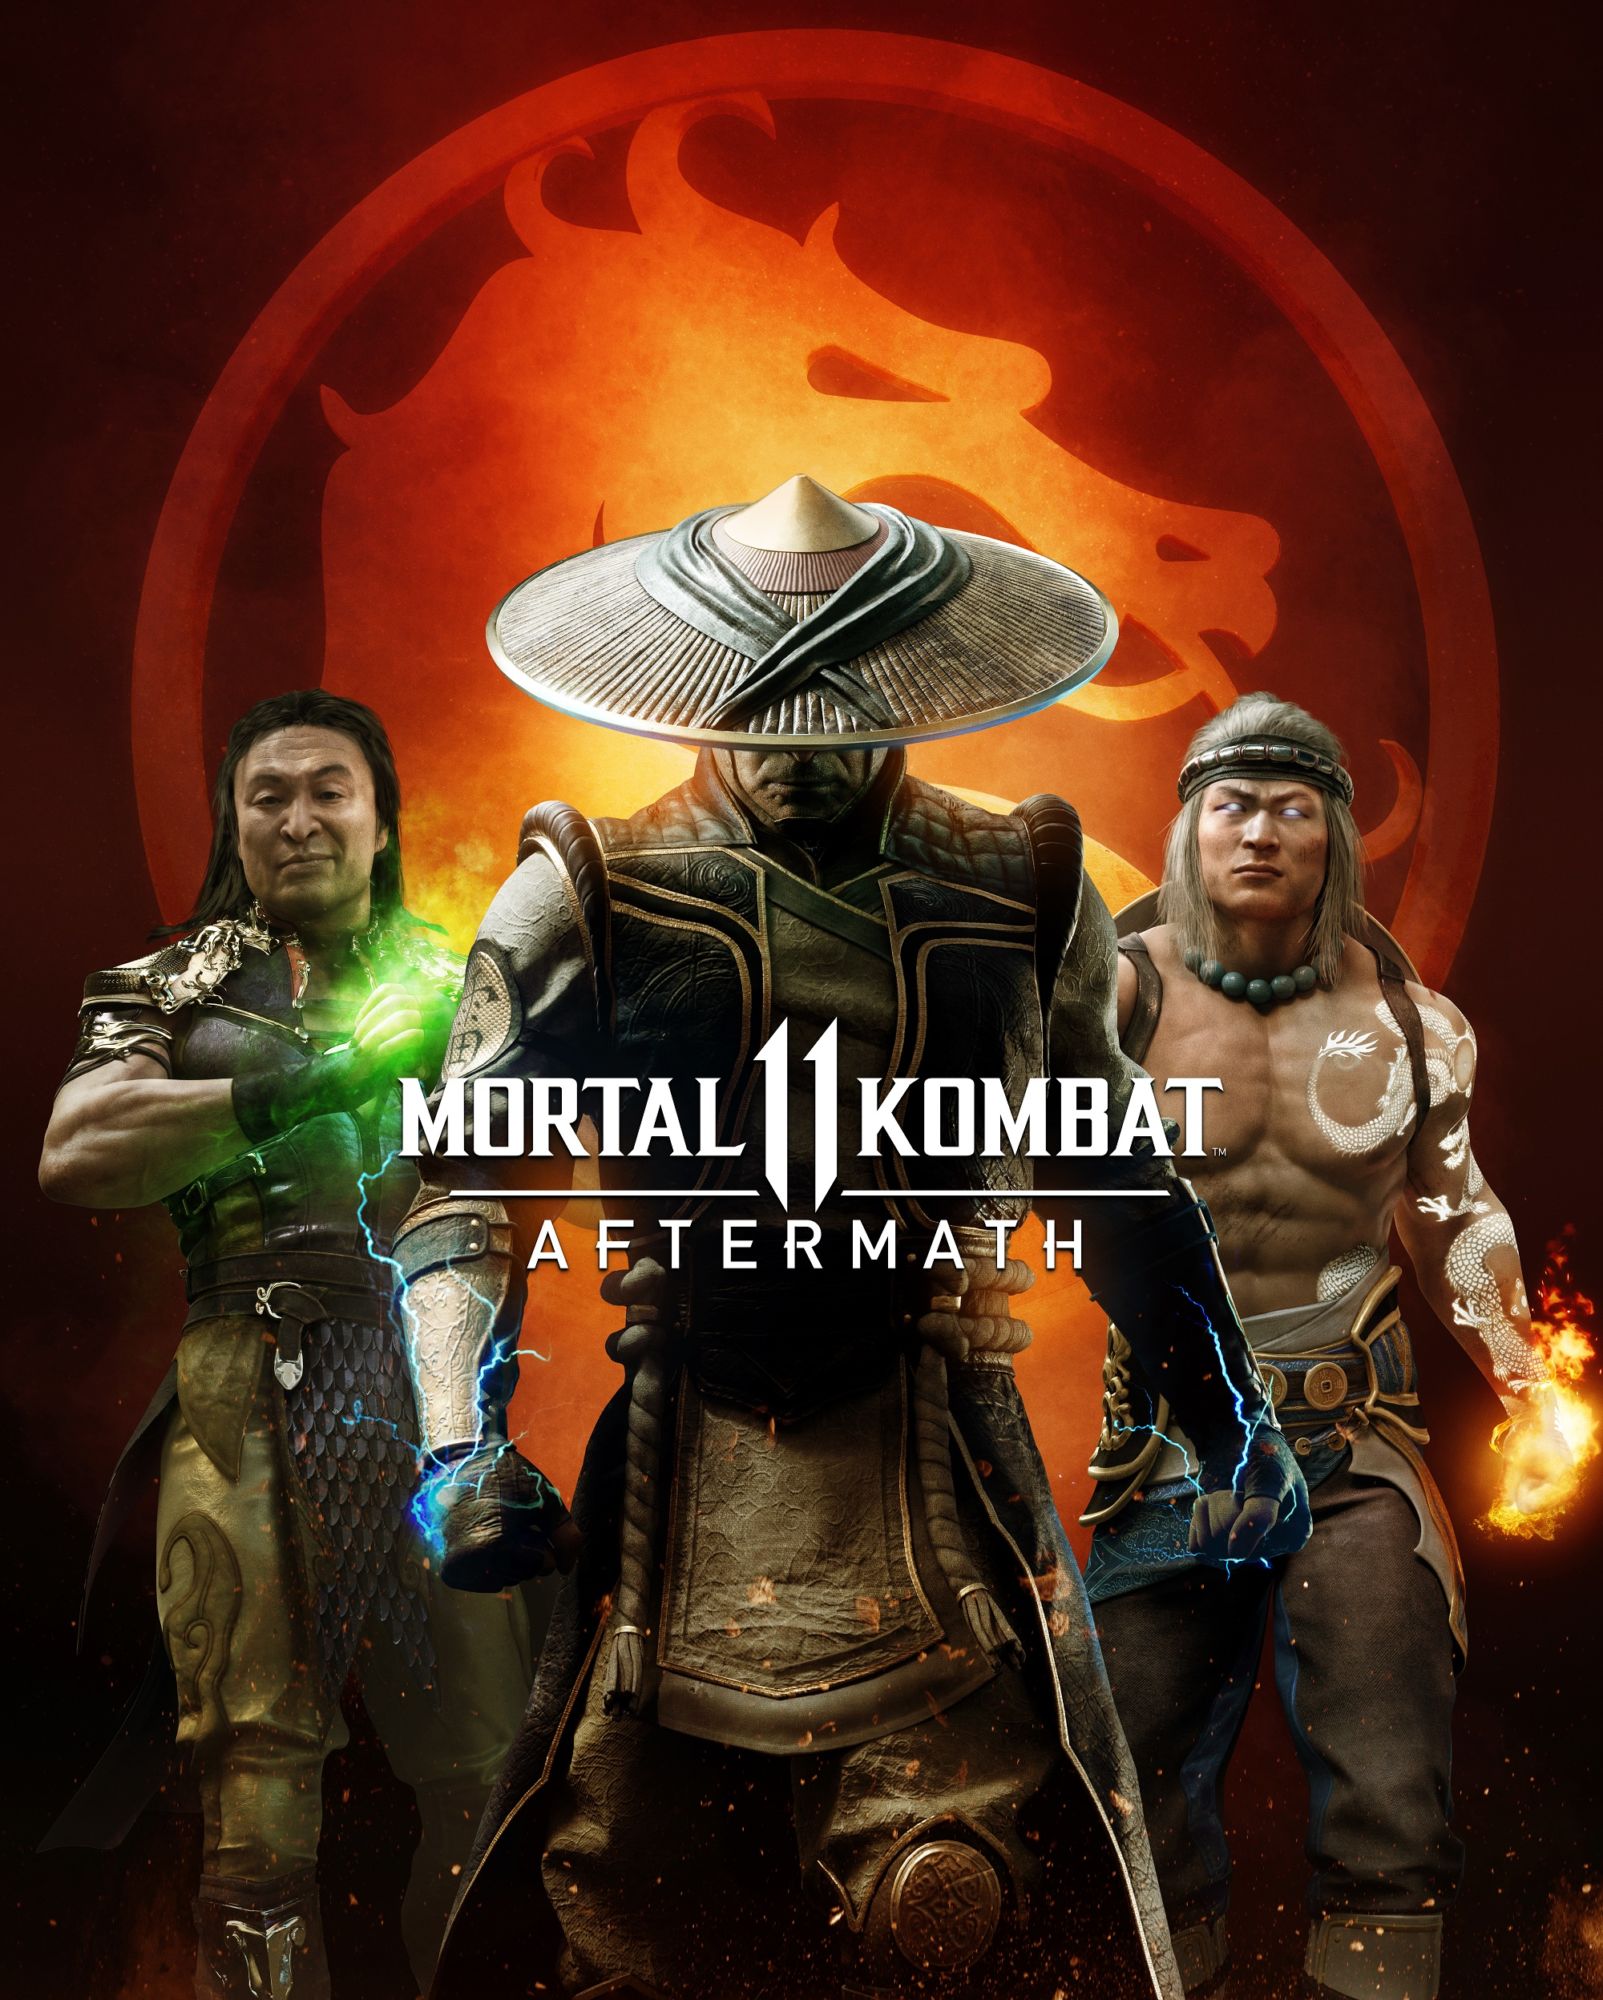 Mortal Kombat 11: Aftermath will be released in late May.